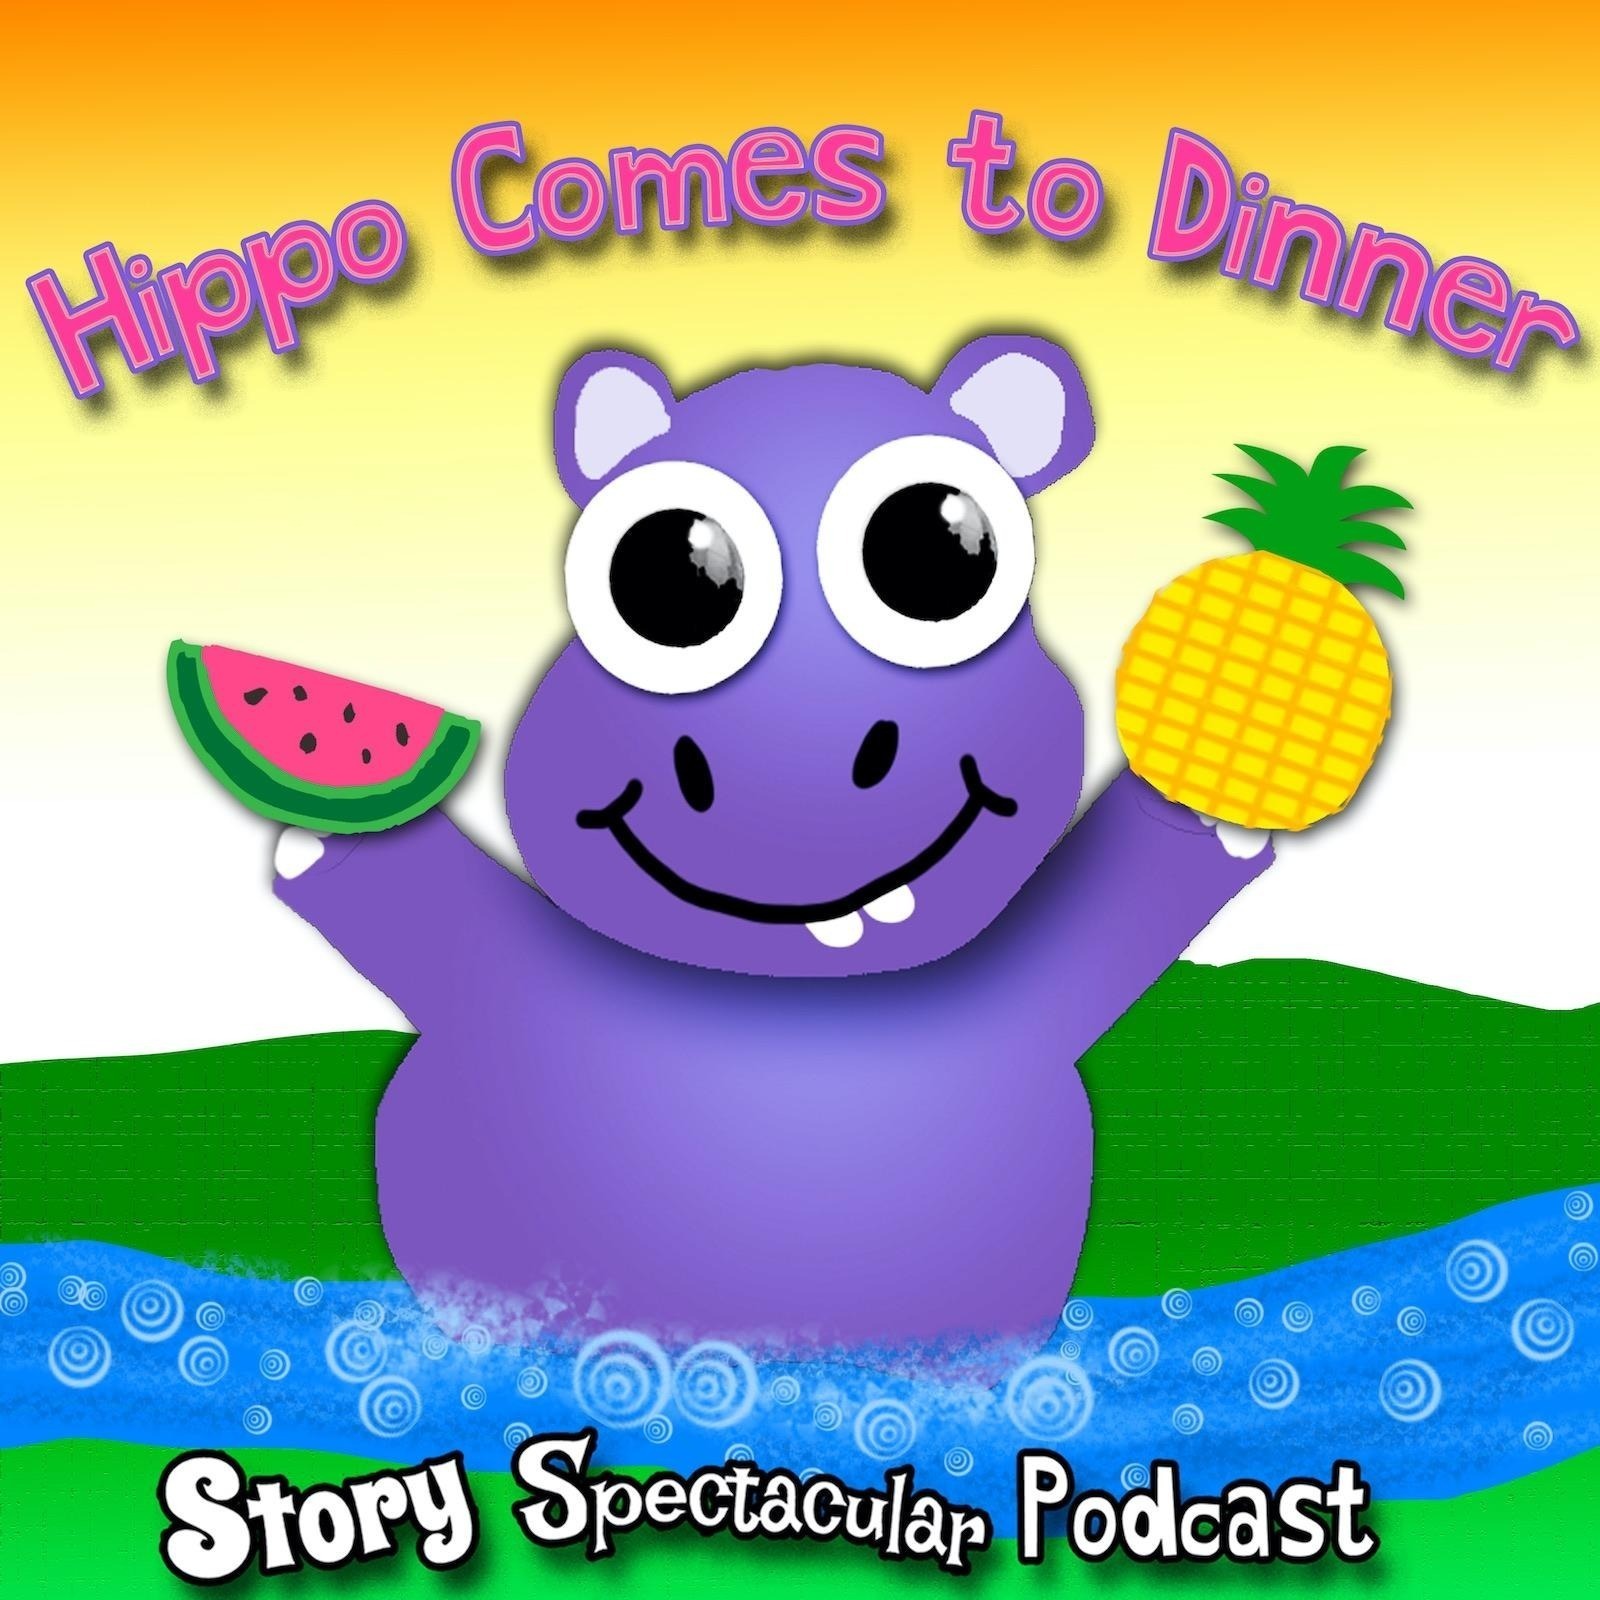 Hippo Comes to Dinner (Bedtime)